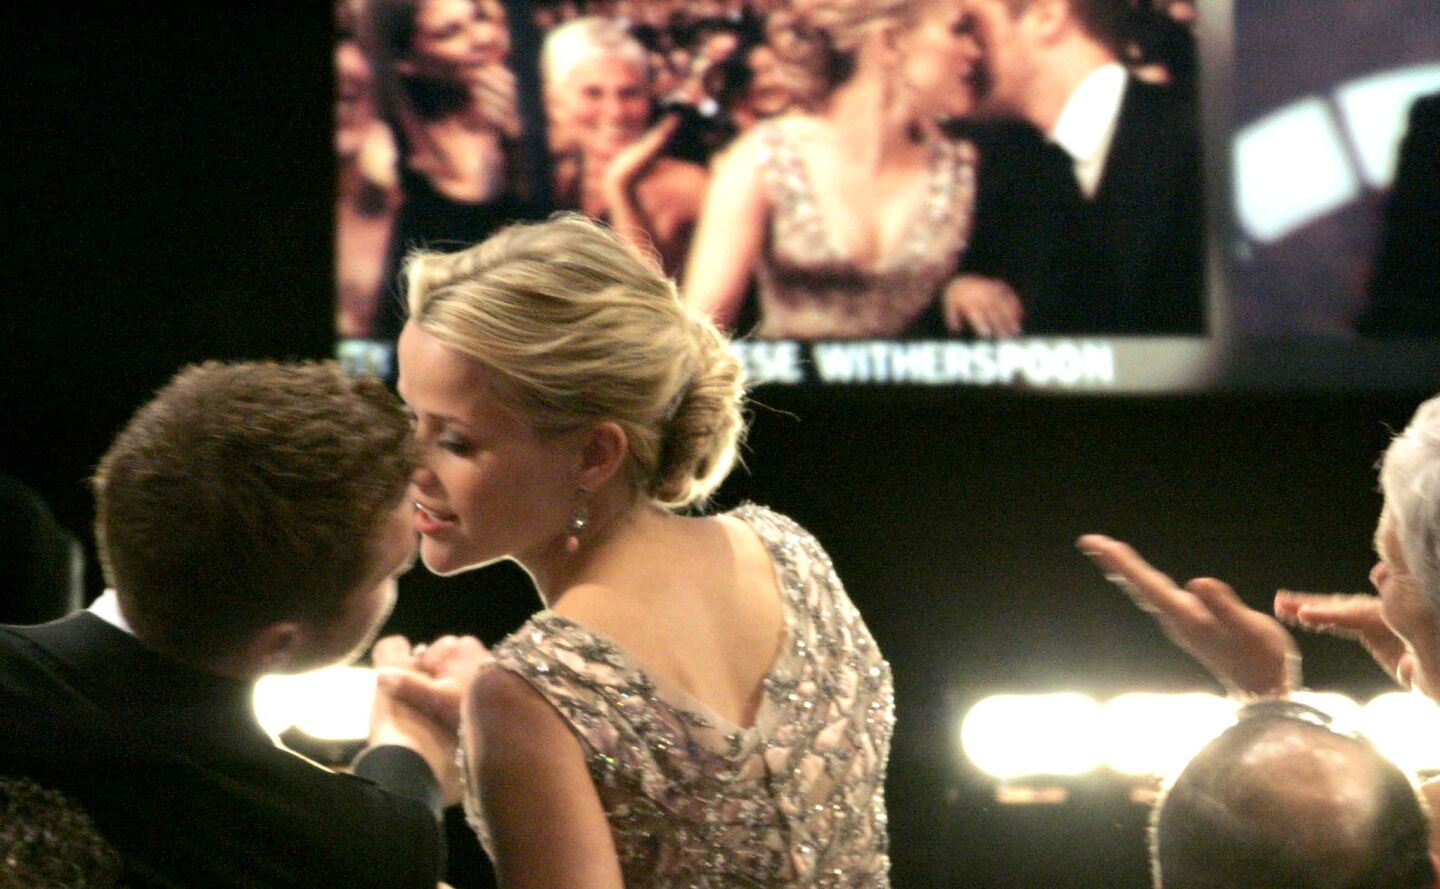 Reese Witherspoon kisses her then-husband, Ryan Phillippe, after hearing her name announced as the lead actress winner for "Walk the Line," during the 78th Academy Awards.